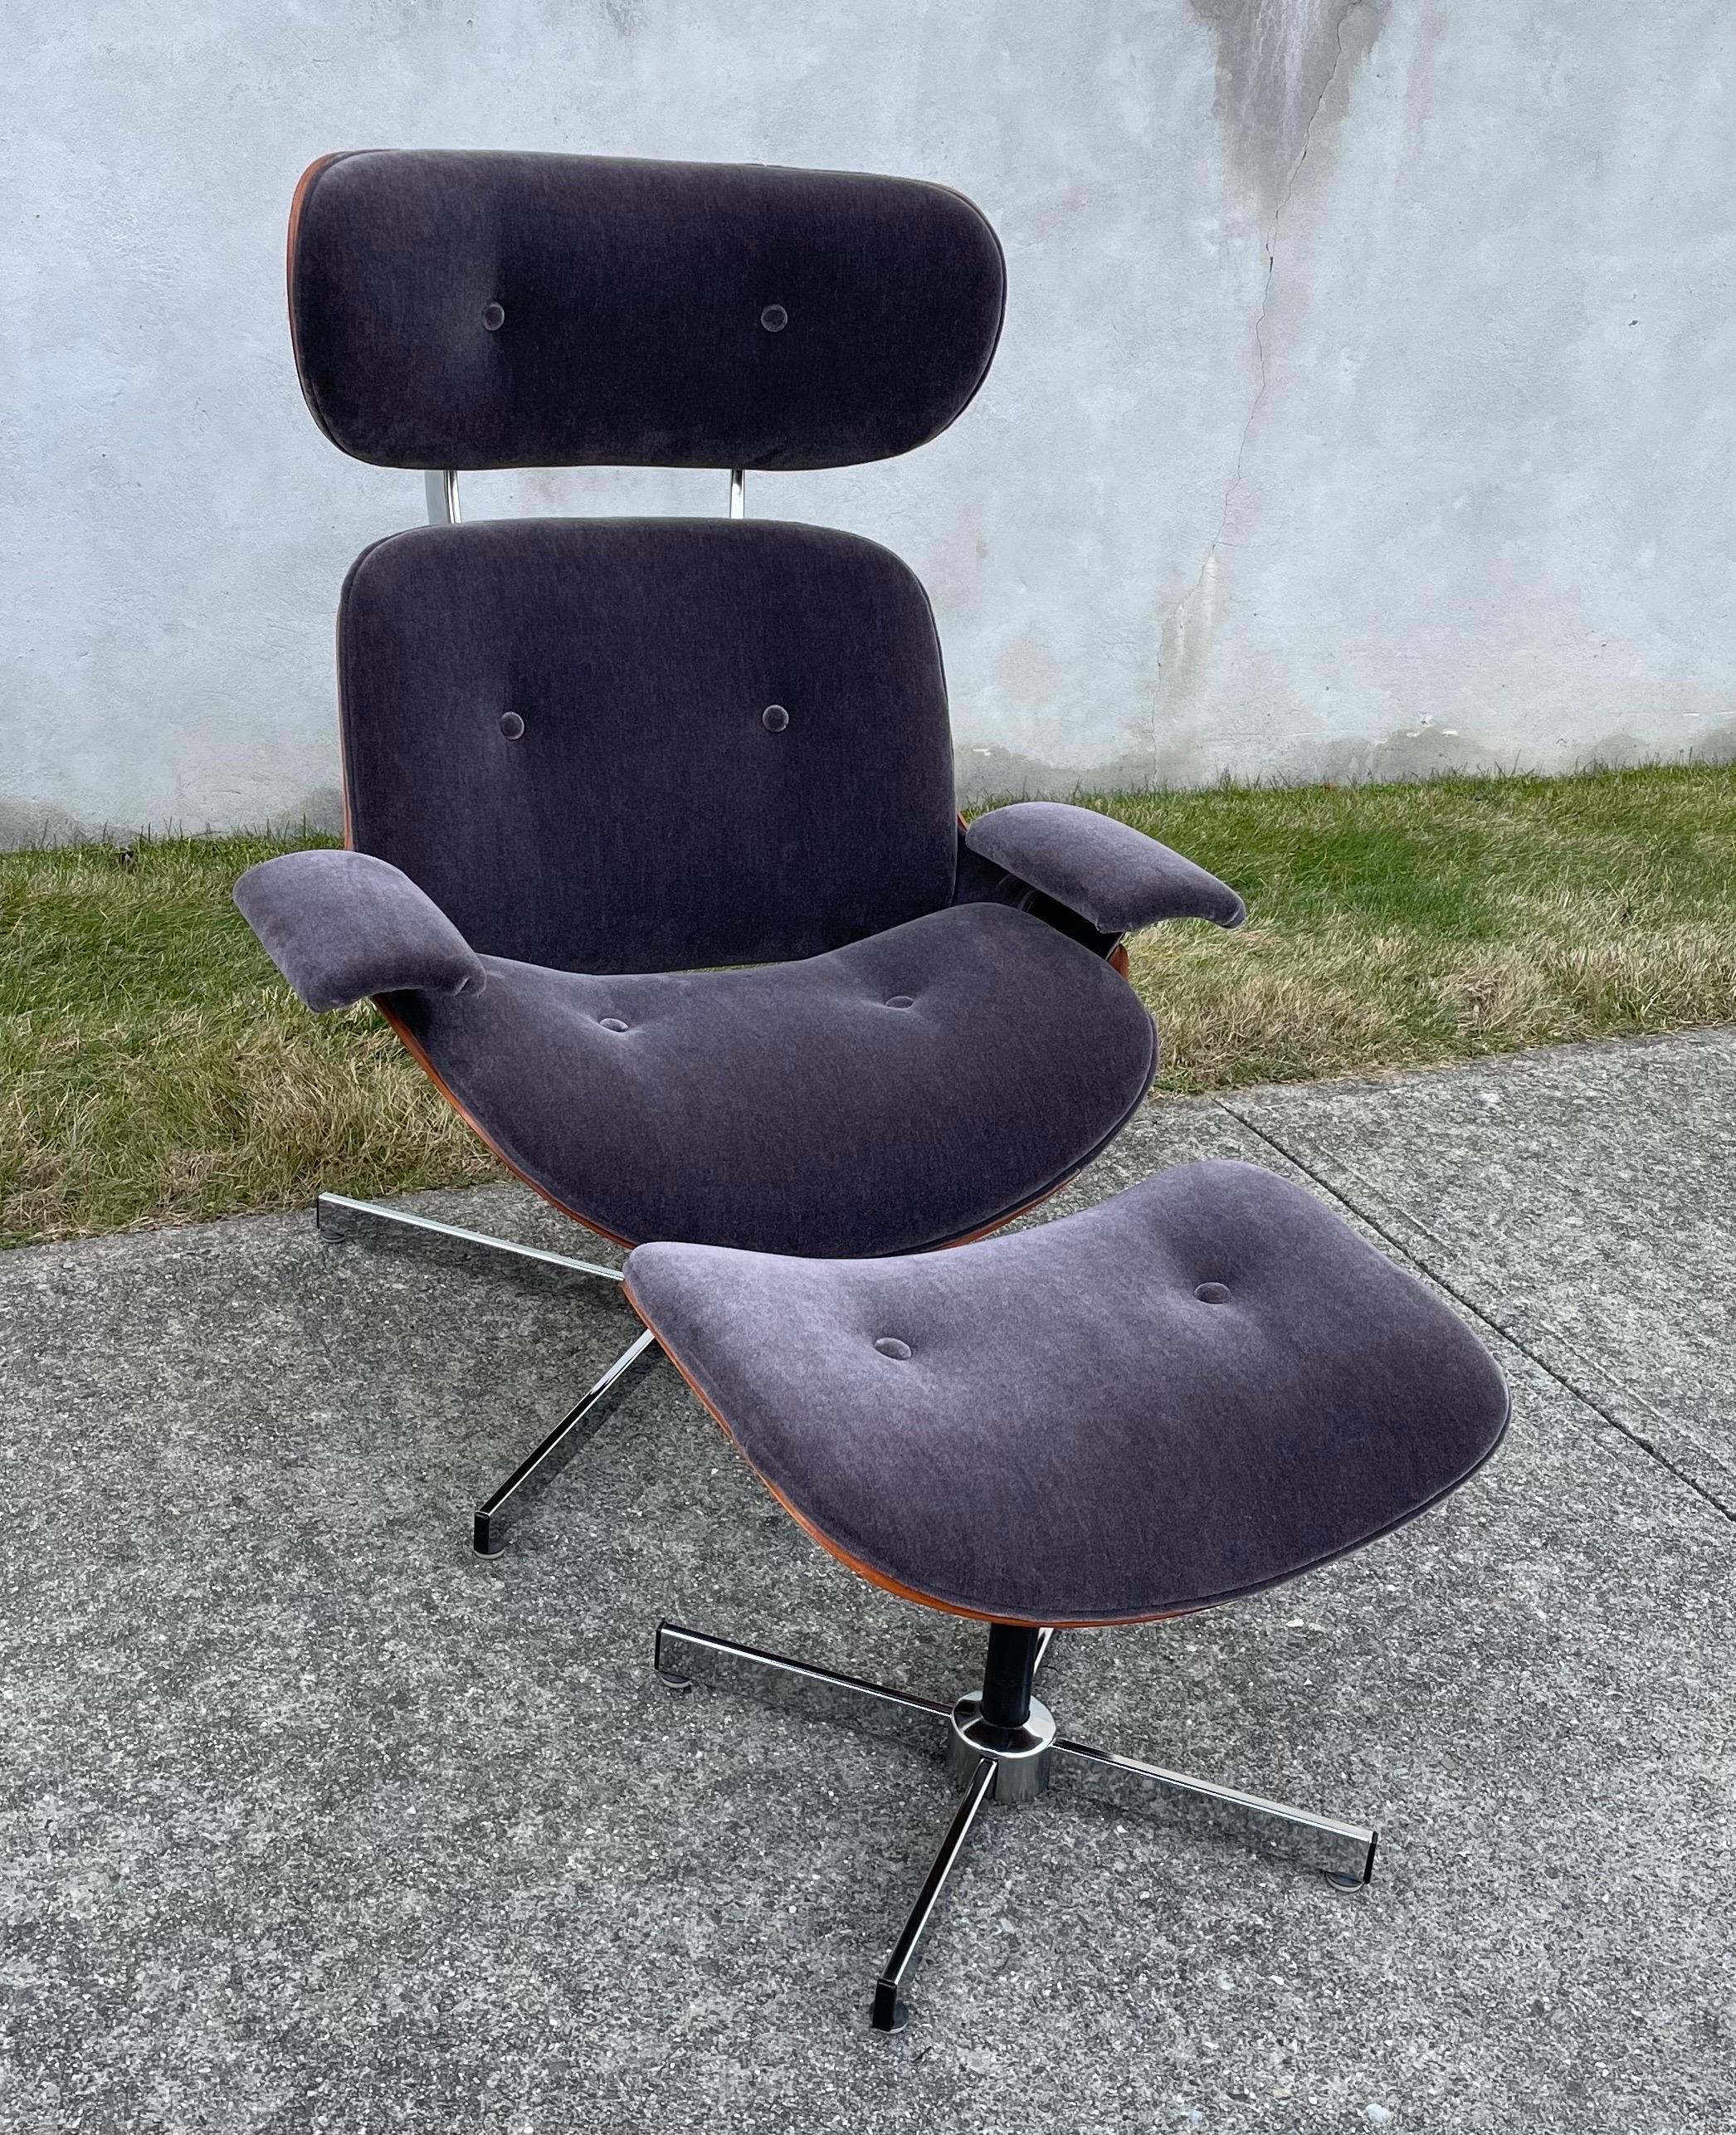 Fantastic Mid Century lounge chair & ottoman by Selig, reupholstered in gray mohair.